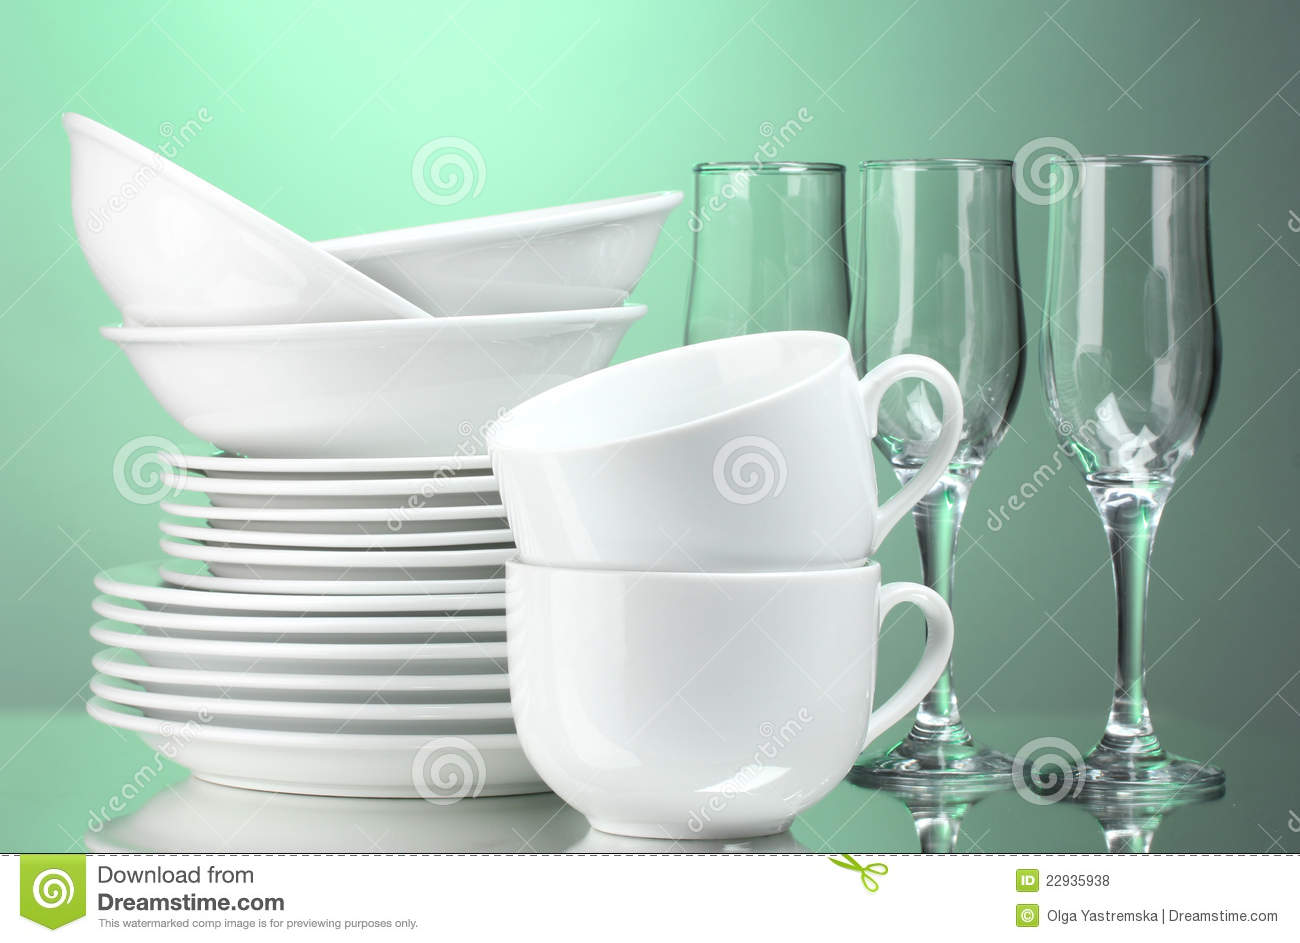 Clean Plates Cups And Glasses Royalty Free Stock Photos   Image